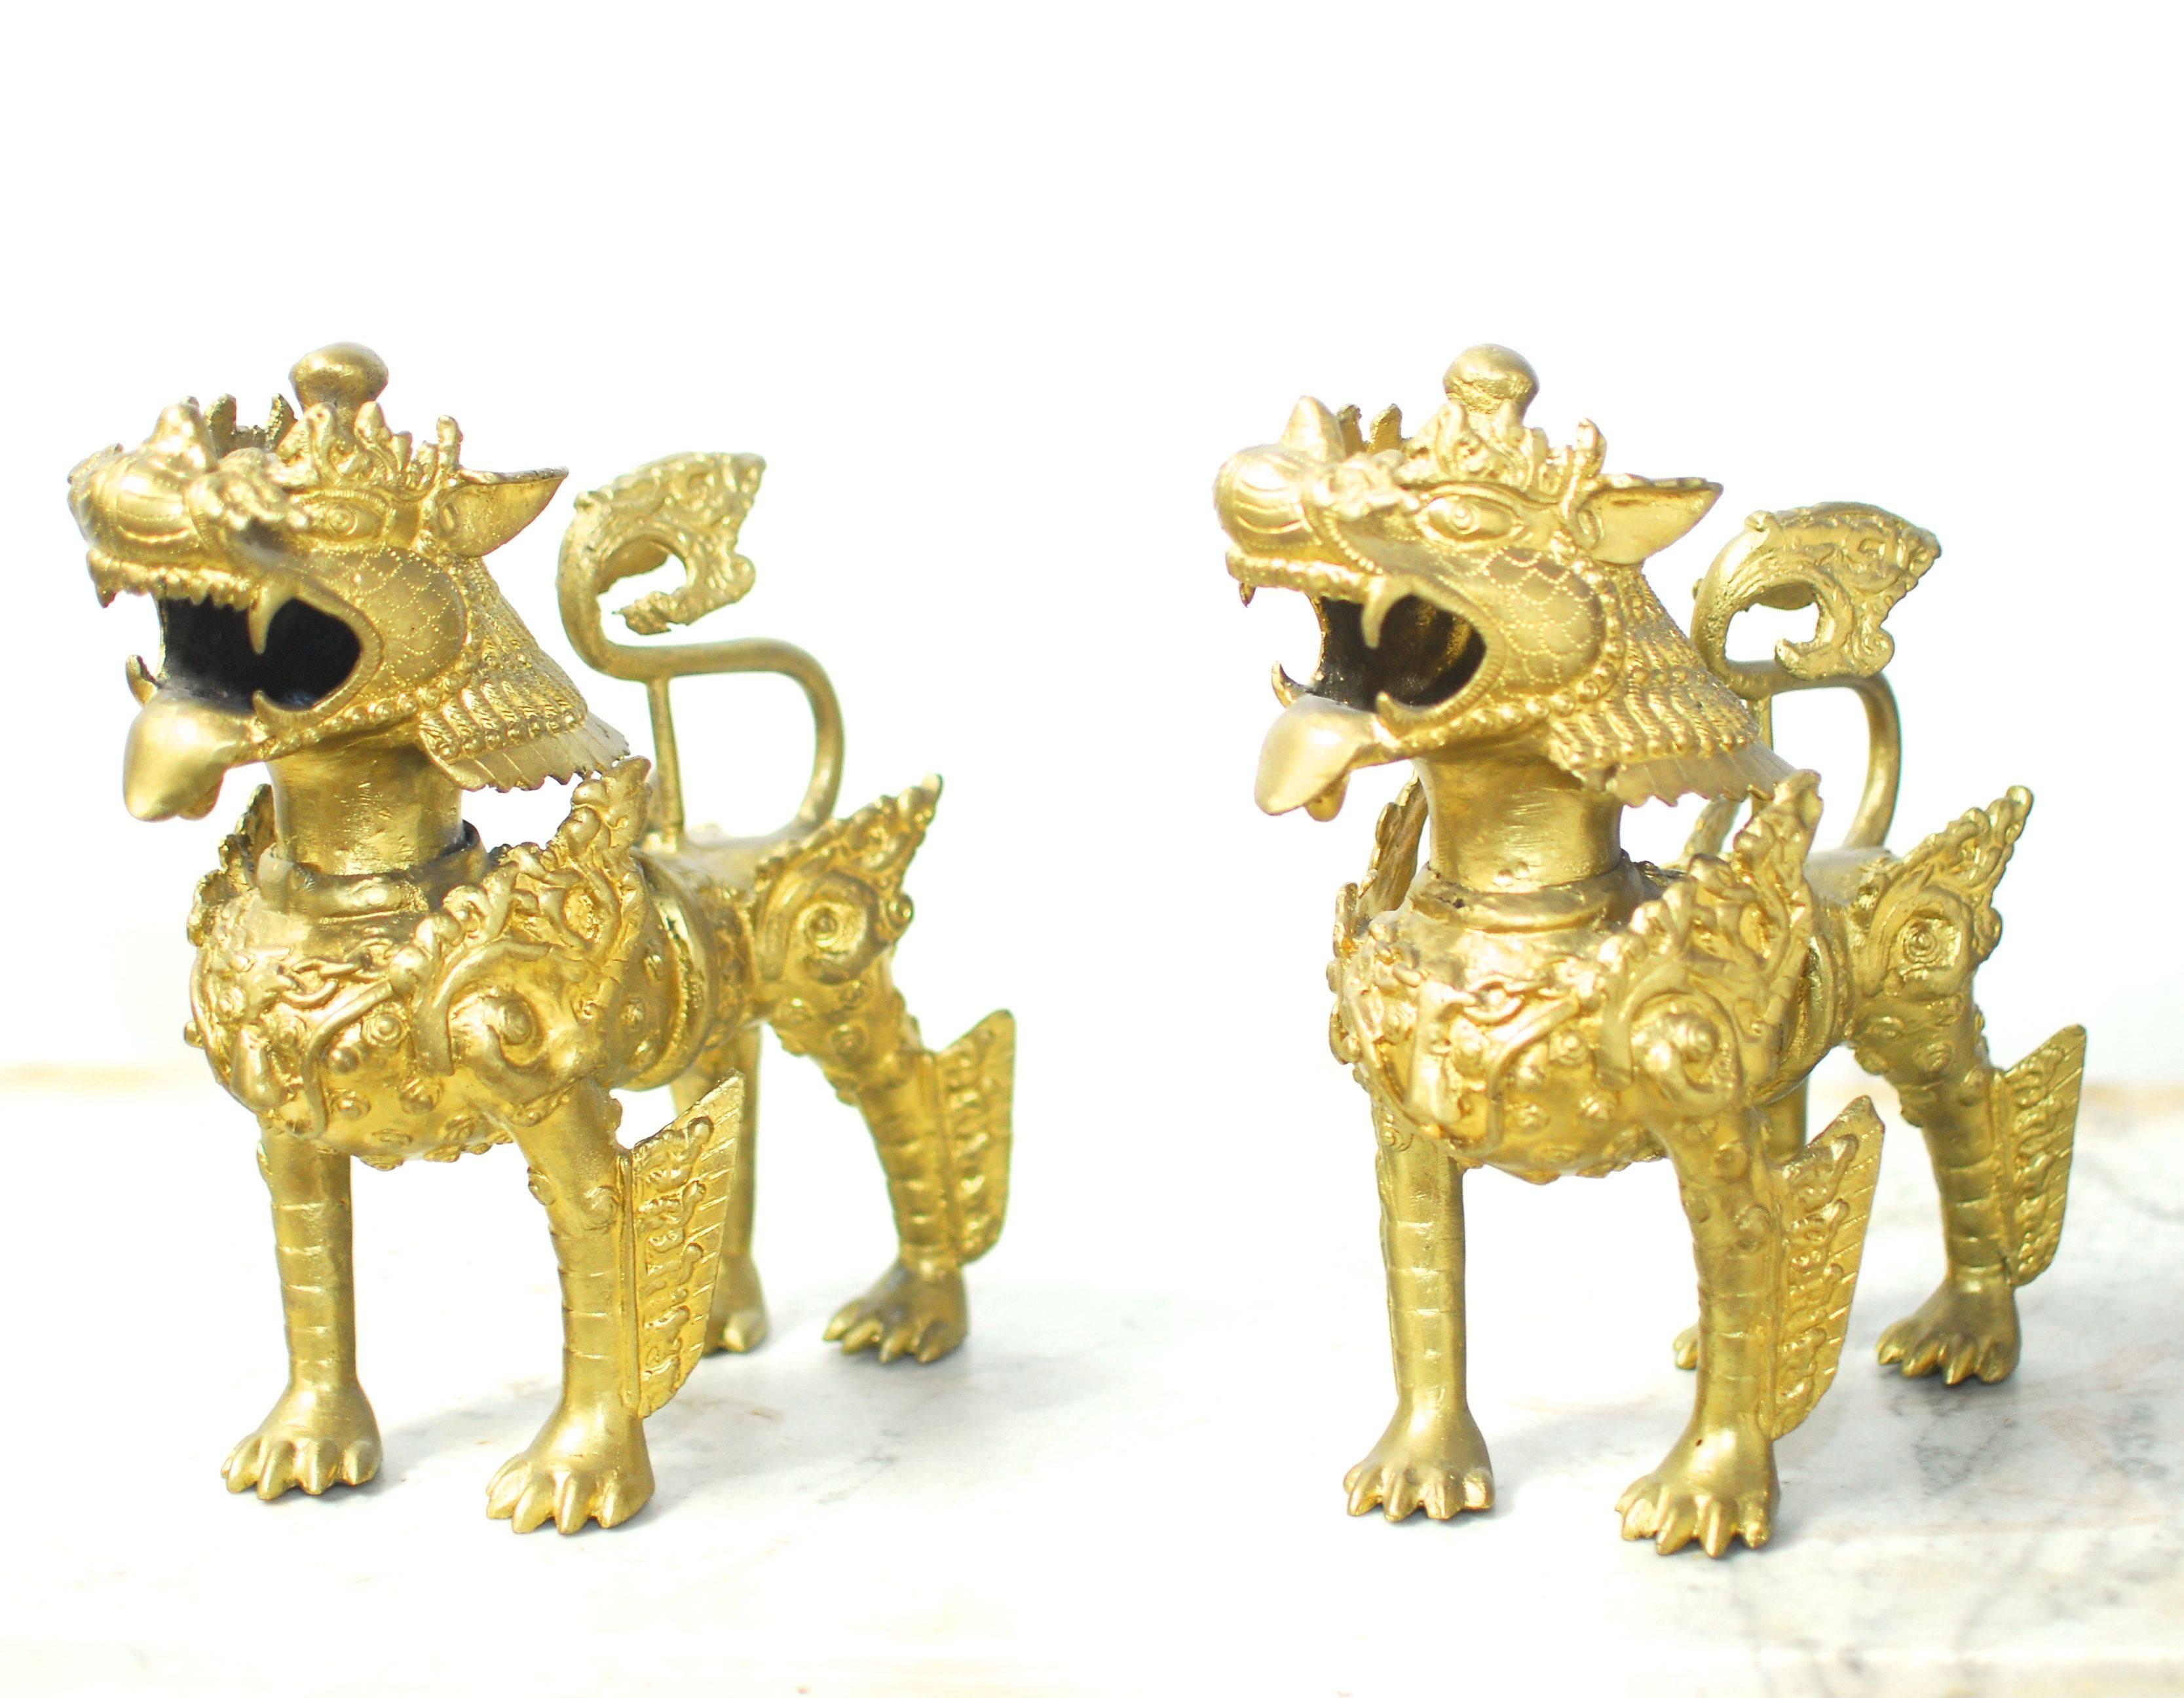 Chic pair of Southeast Asian gilt foo dogs made of solid brass. Intricate details with fierce expressions. Also known as temple dogs. Each one weighs 10 pounds.
